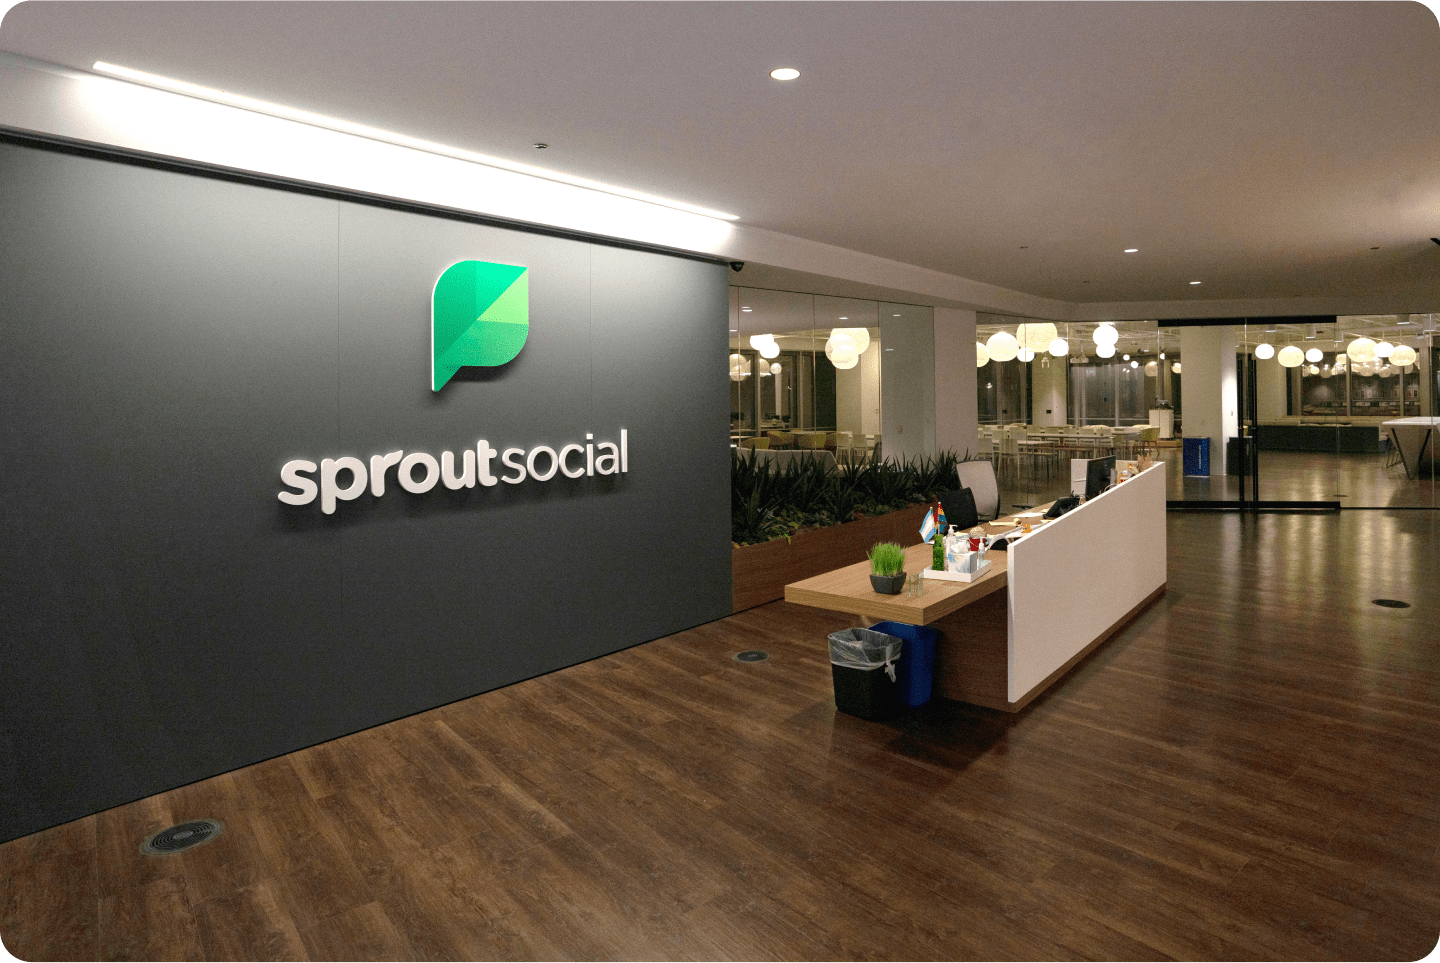 The Sprout Social logo prominently displayed on the wall behind the front desk of Sprout’s Chicago office.